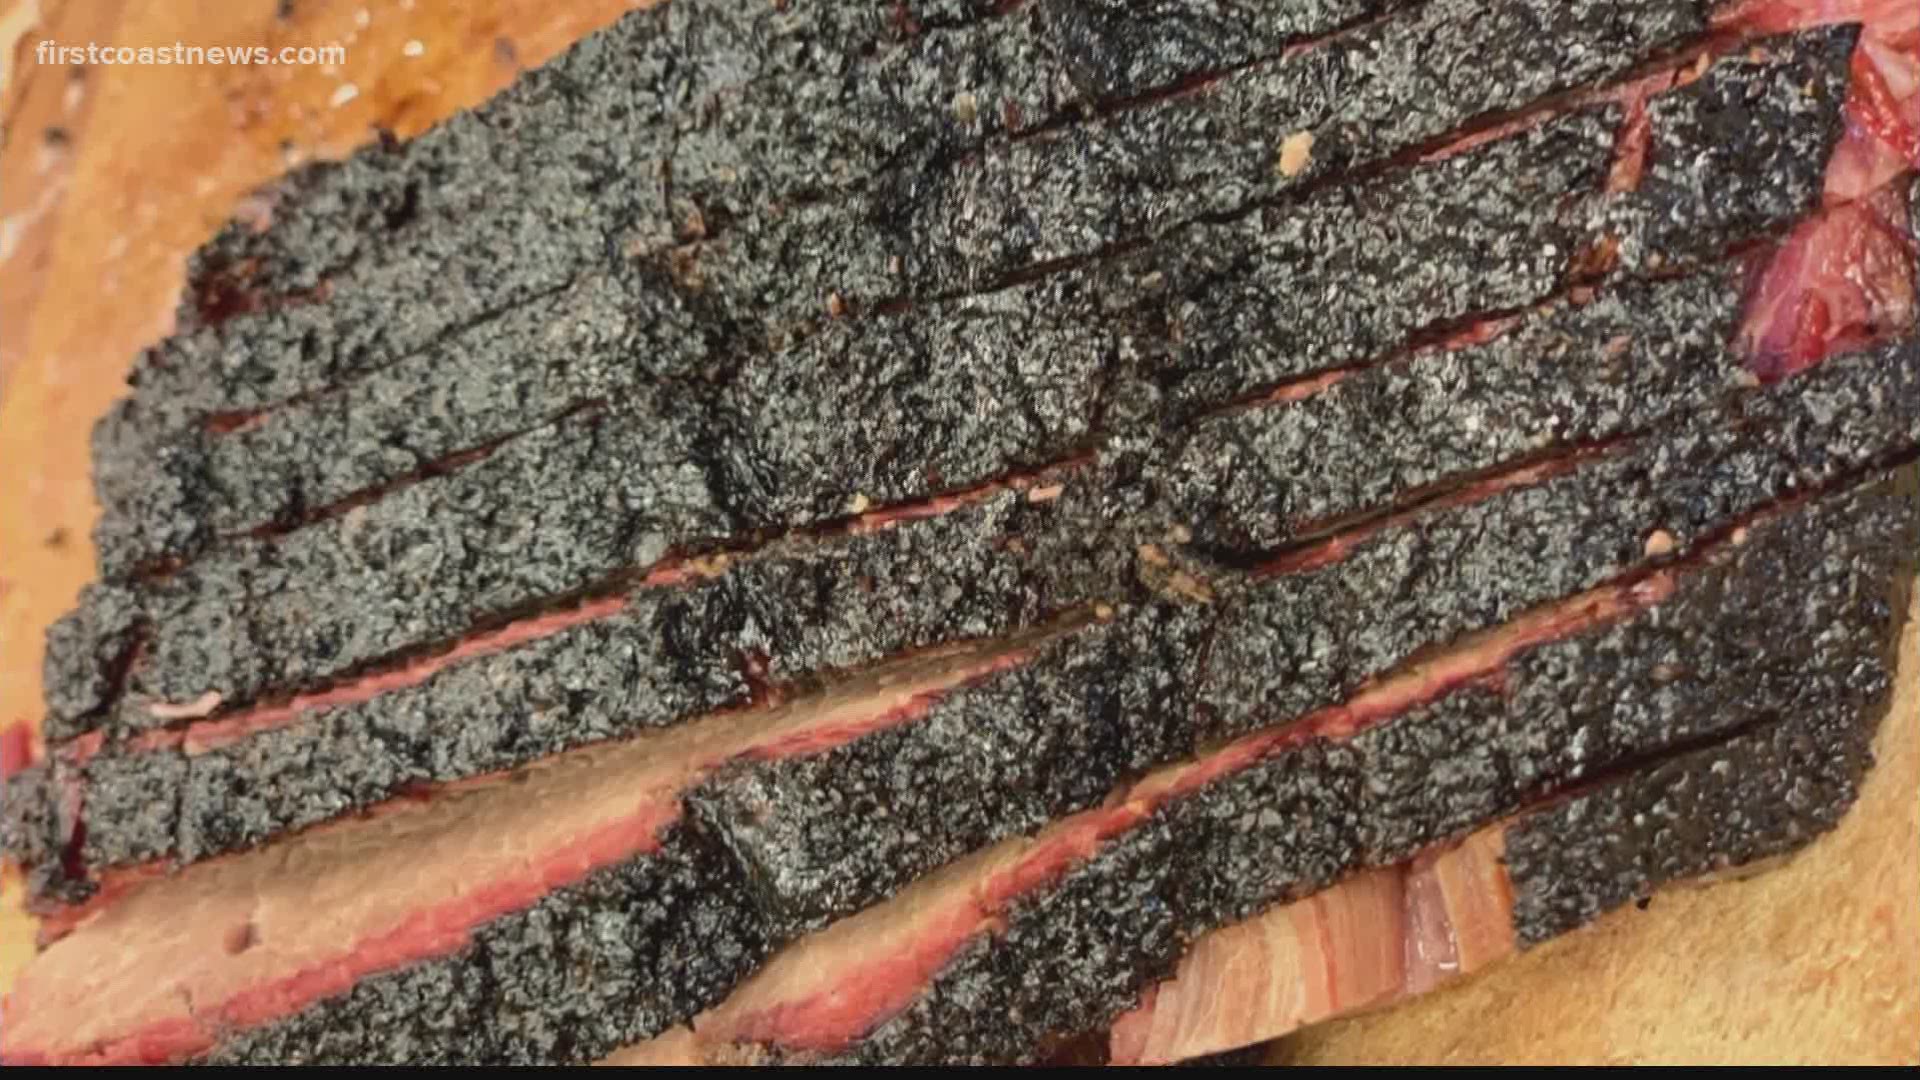 You can score some tasty BBQ while helping out a local business in need of support.